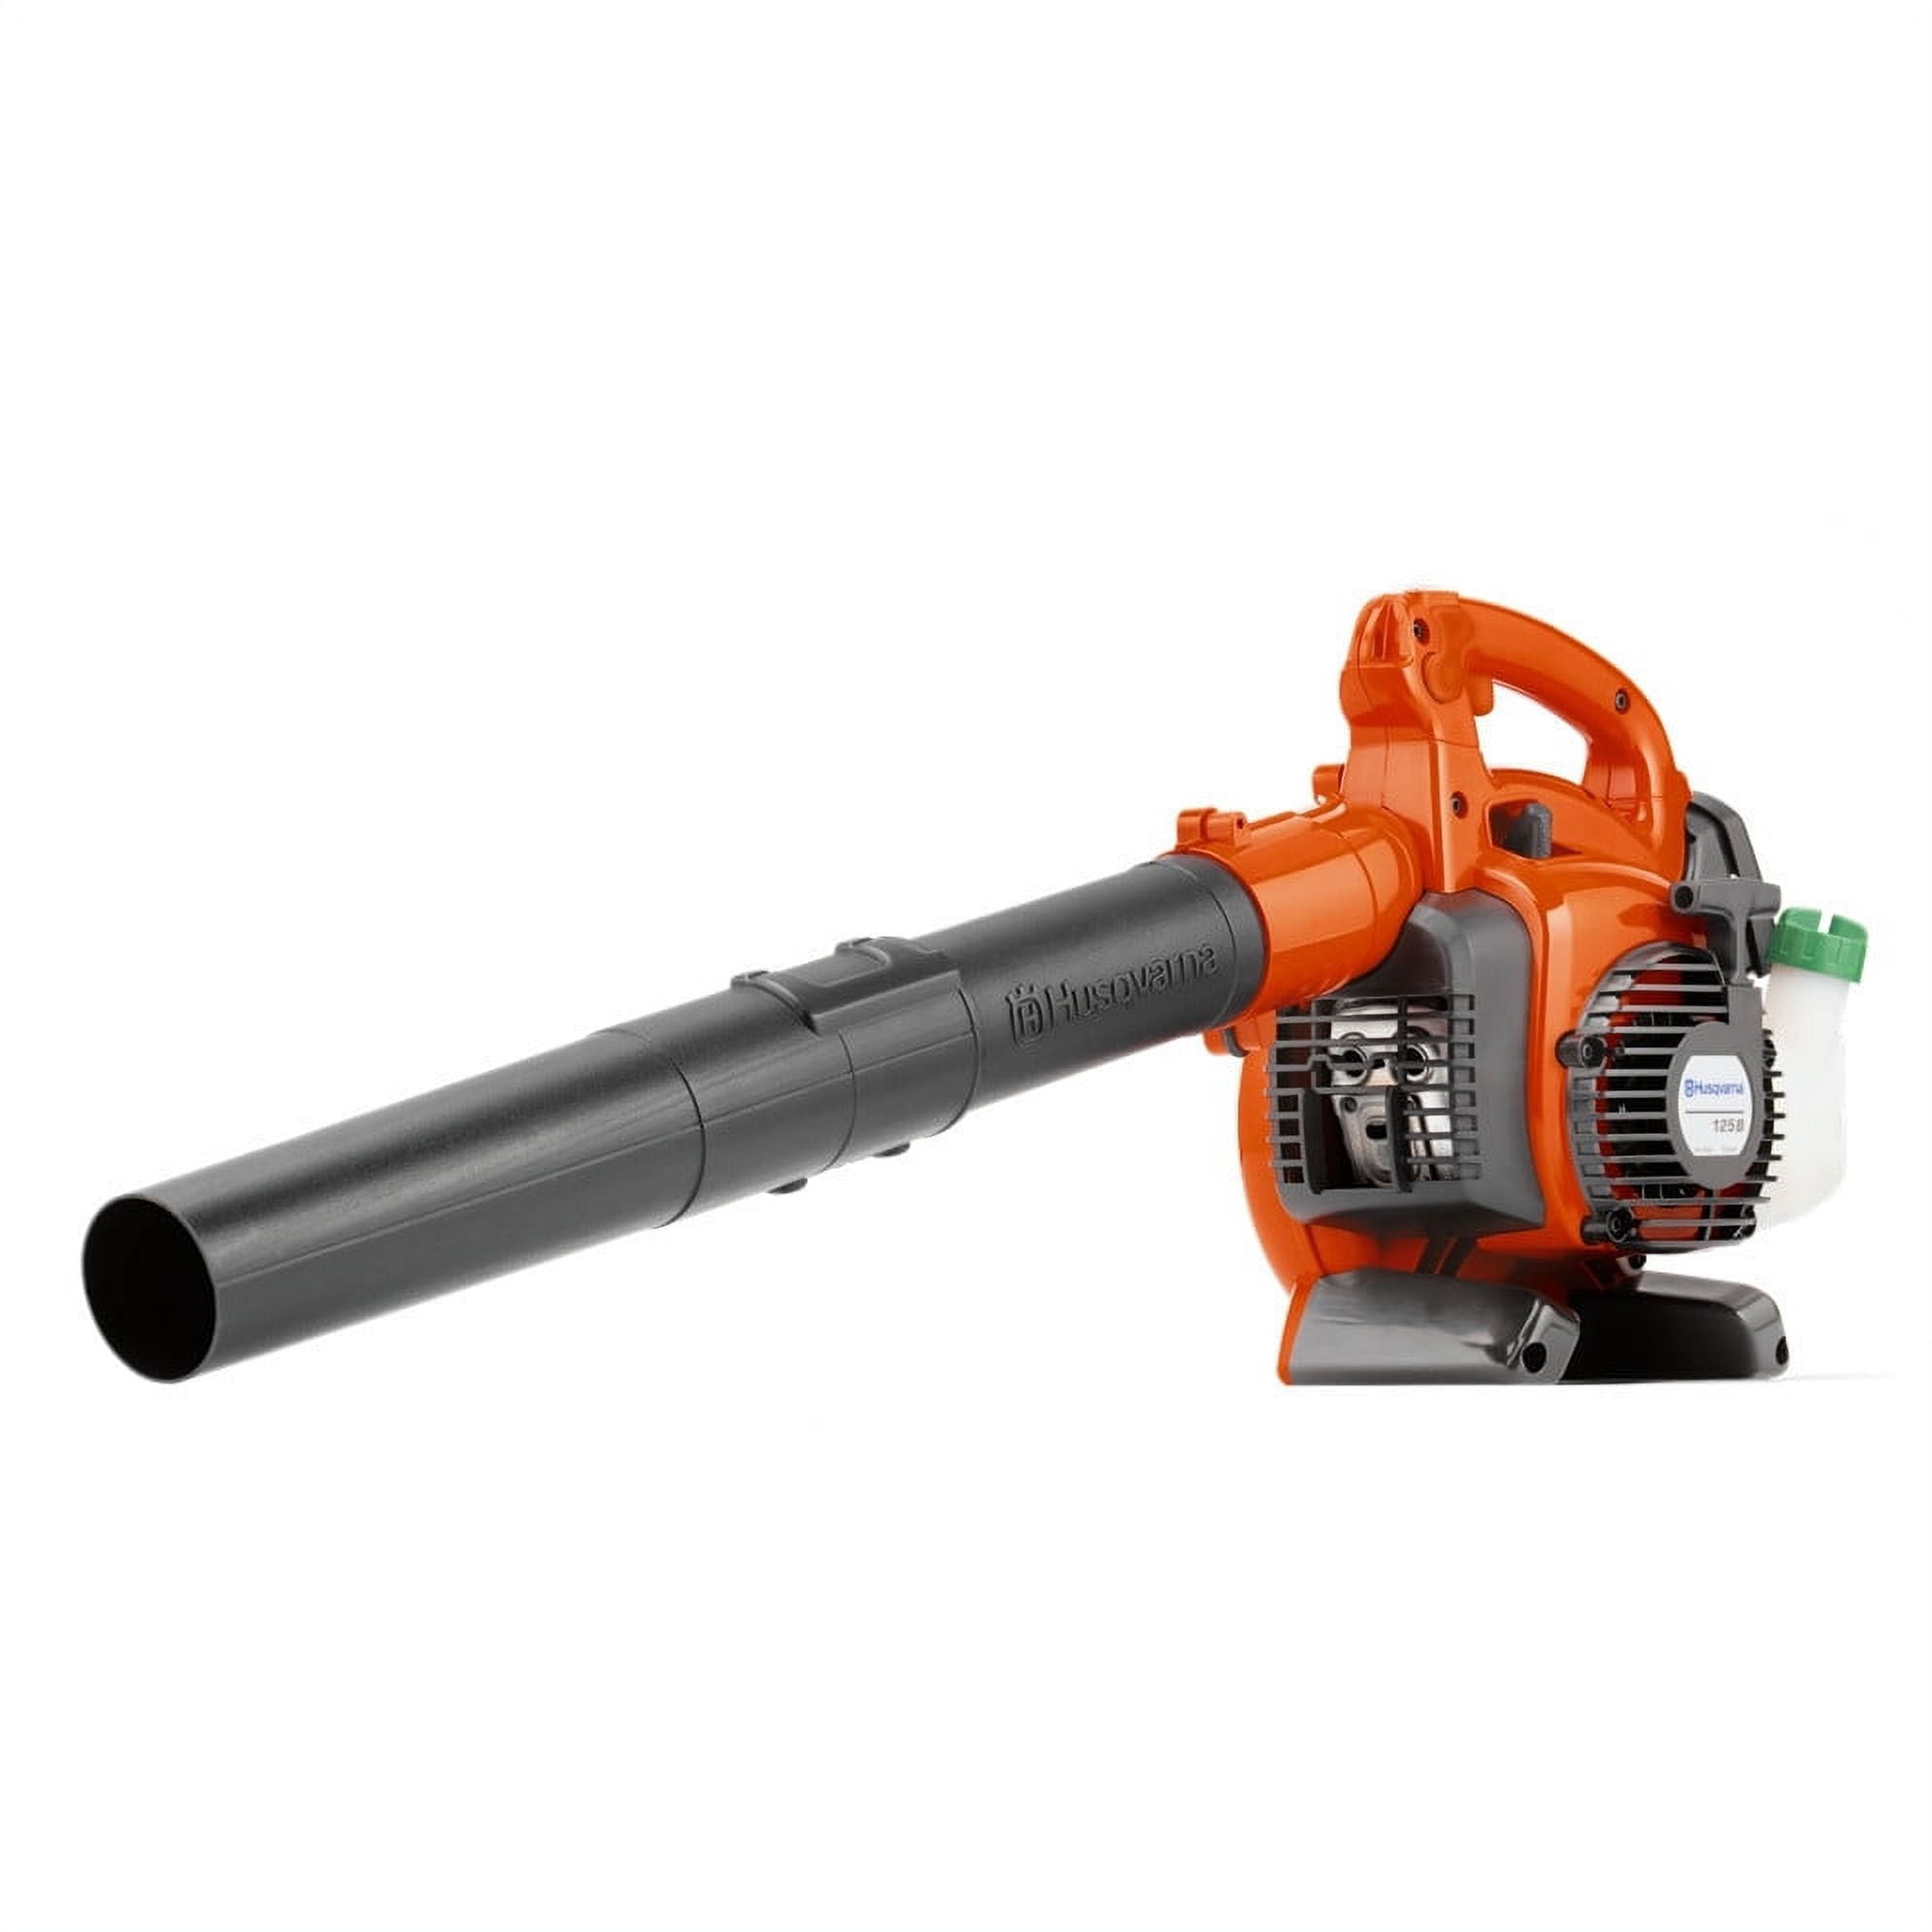 Mellif Cordless Leaf Blower Compatible with DEWALT 20V Max Battery  Powerstack Handheld Electric Jobsite Air Blower 100CFM 110MPH Powerful for  Lawn Care, Snow Blow